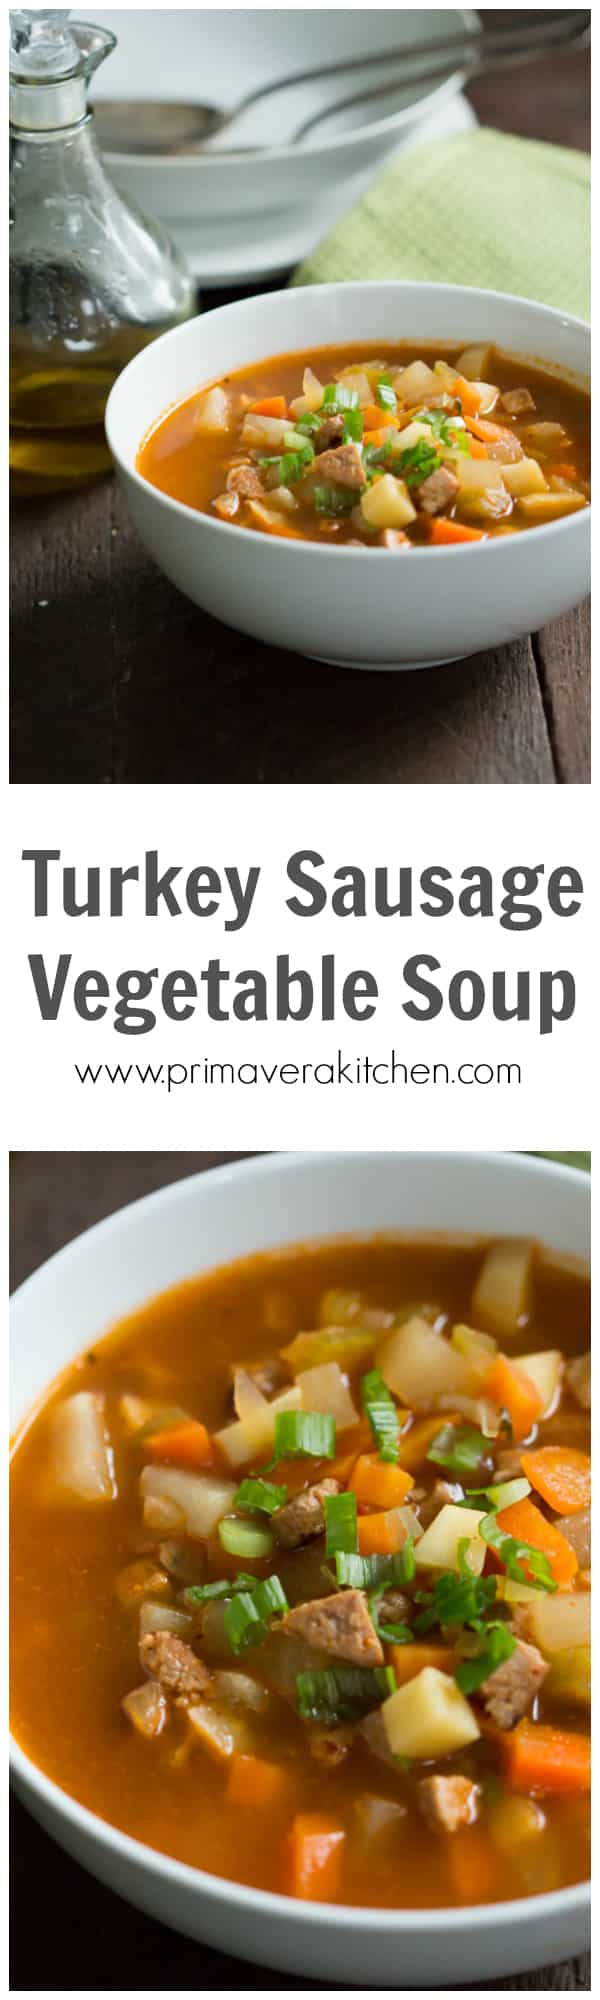 turkey-sausage-vegetable-soup - Enjoy this filling Turkey Sausage Vegetable Soup that is packed with the flavors of turkey sausage, tomatoes, parsnip and turnip. This is a very satisfying soup and it'll warm you up during the cold weather. 